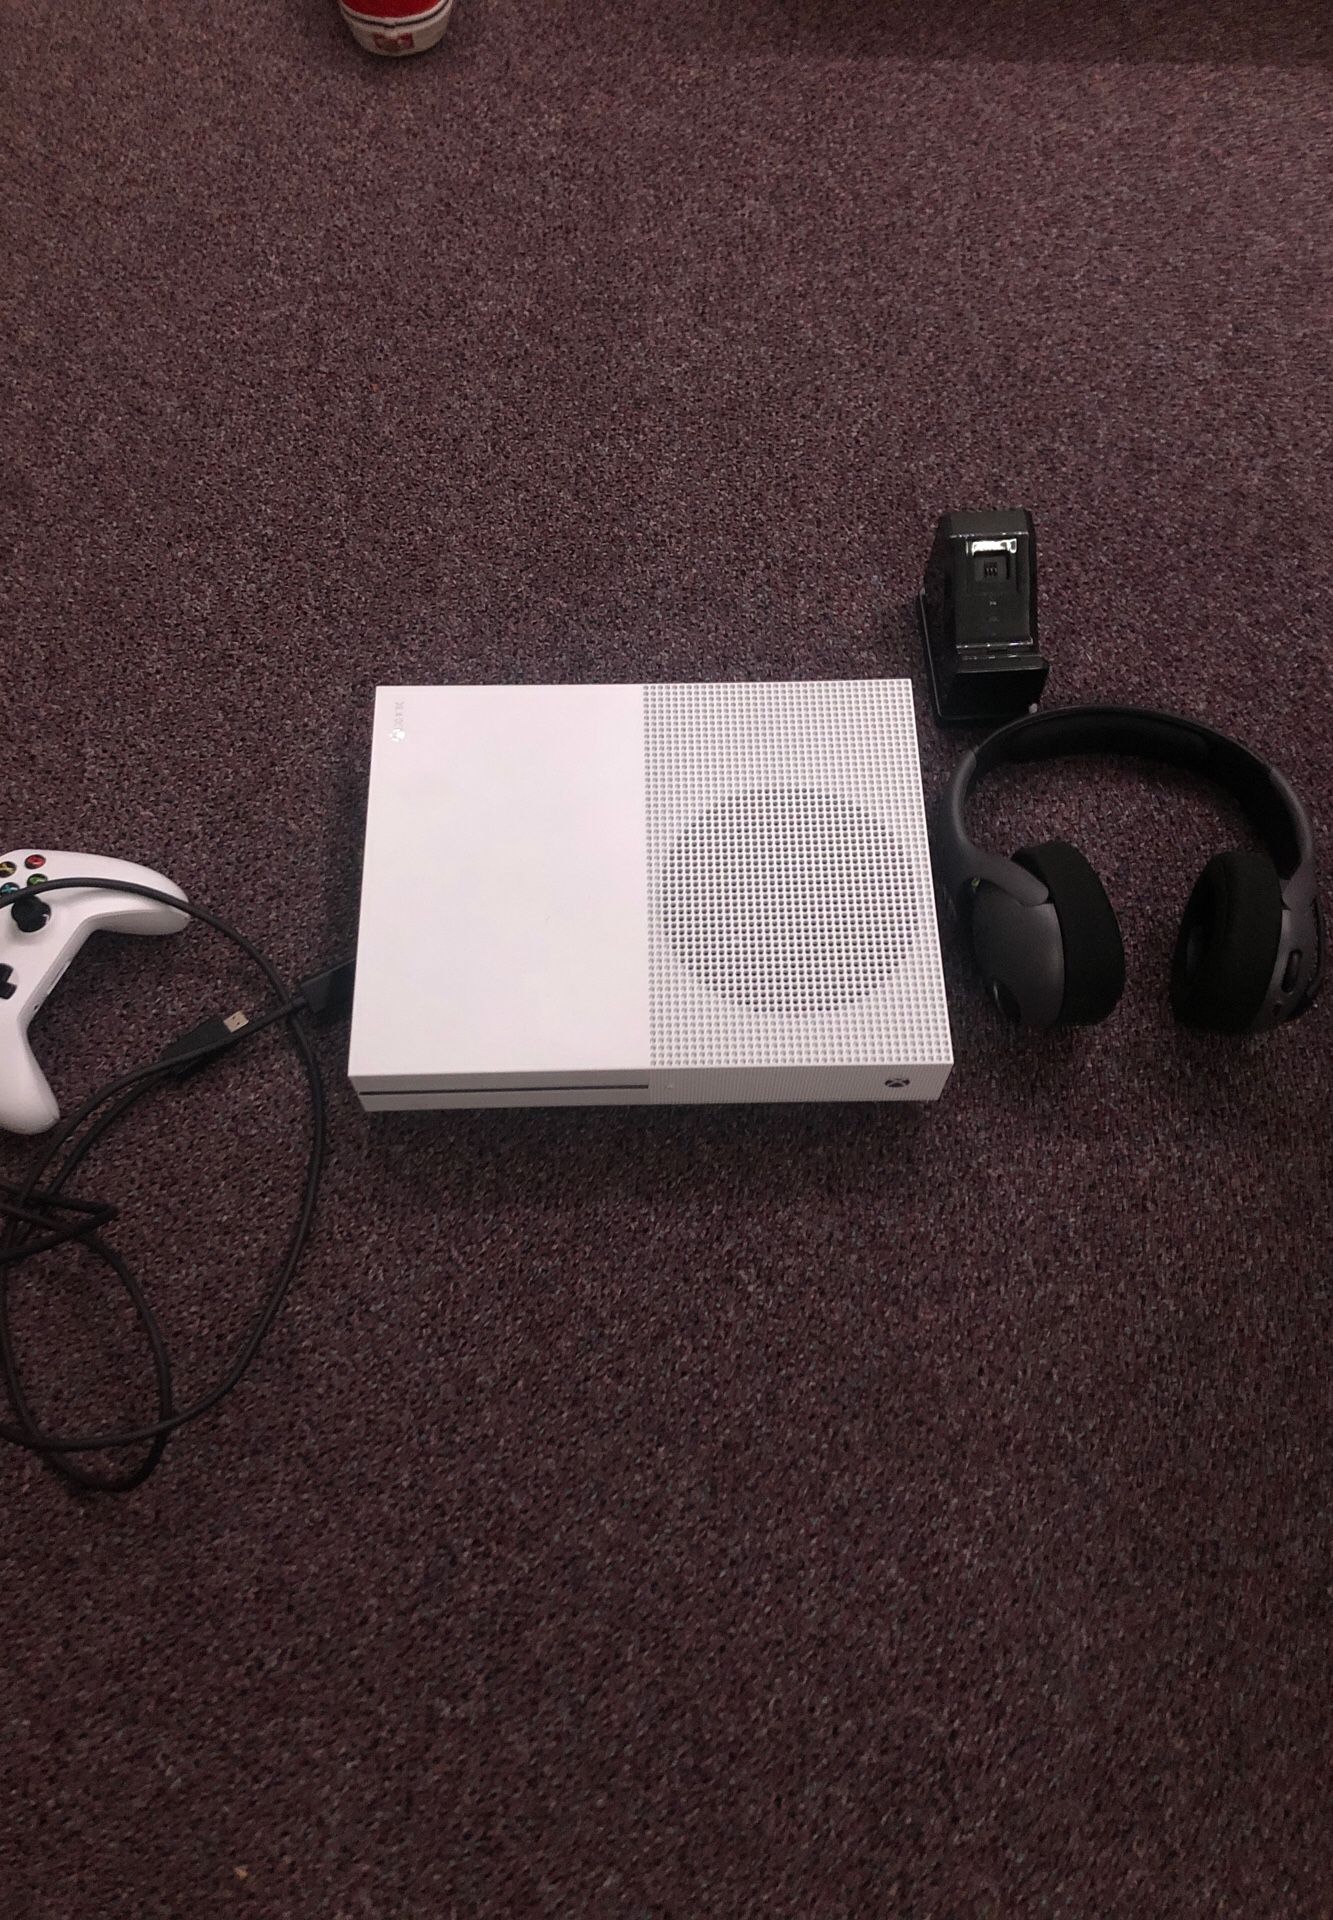 Xbox one s , control, WIRELESS headset with USB port , RECHARGEABLE docking station with battery